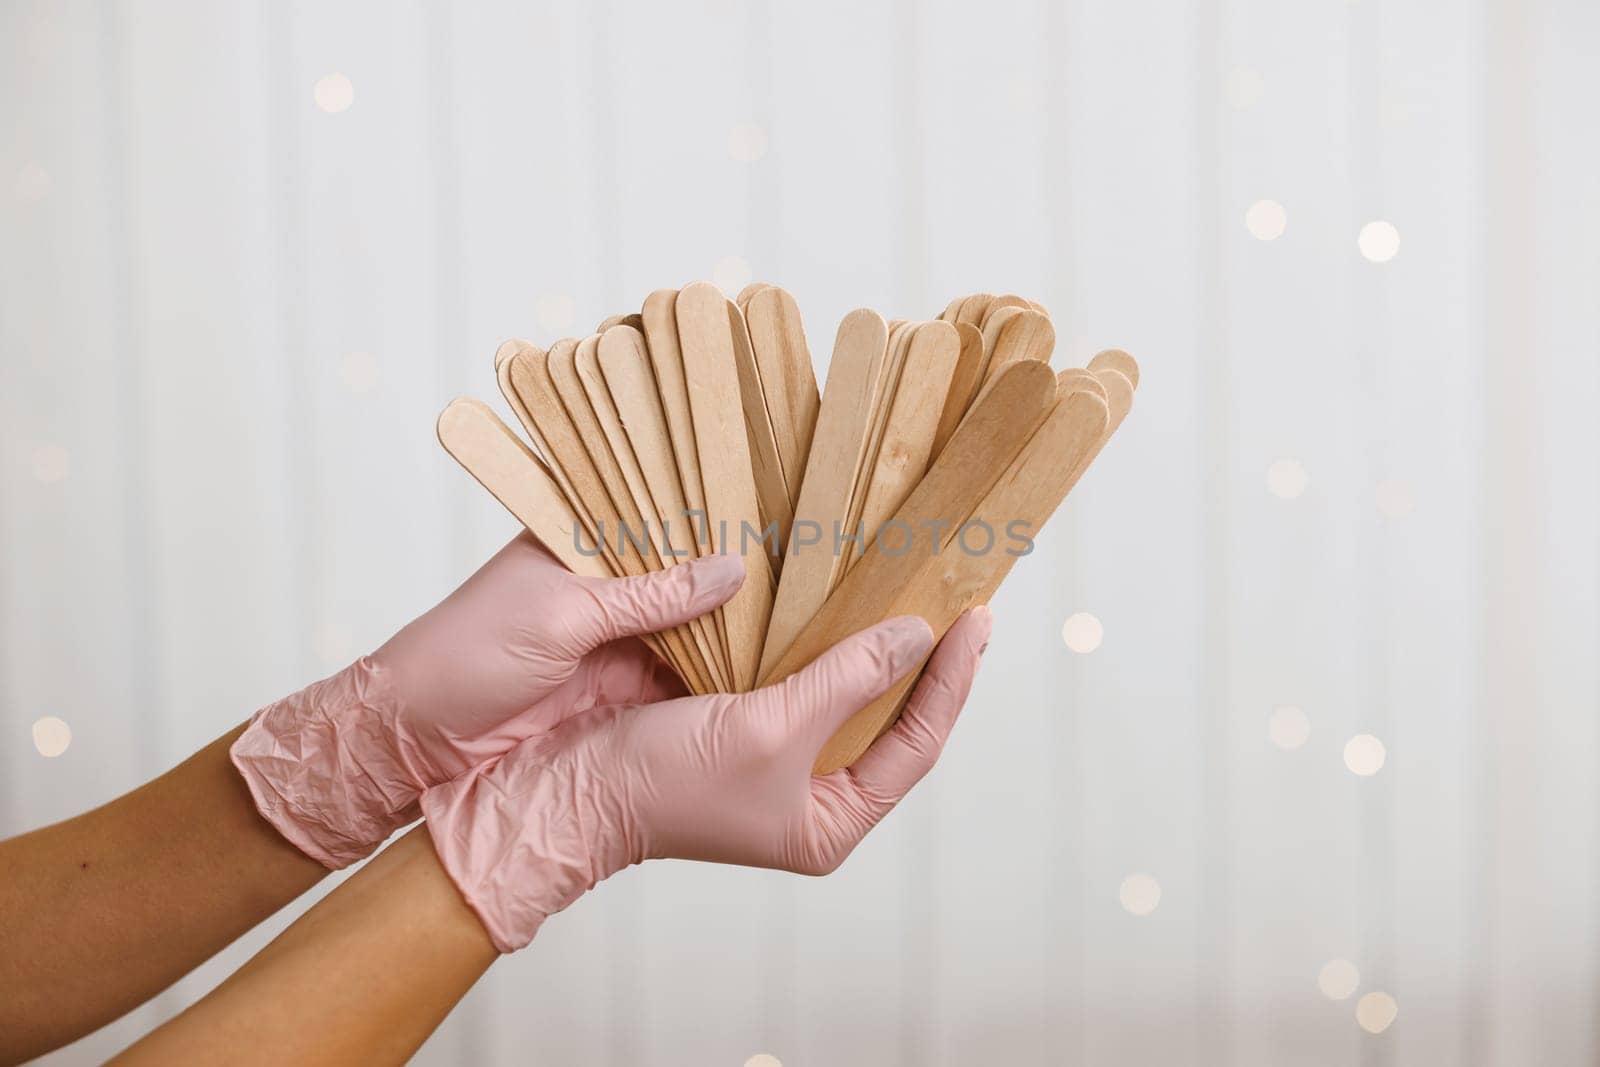 Woman holding many wax wooden spatulas. The young woman is wearing beige clothing and in pink medical gloves. The concept of beauty, depilation, waxing, sugaring smooth skin without hair, banner. by uflypro